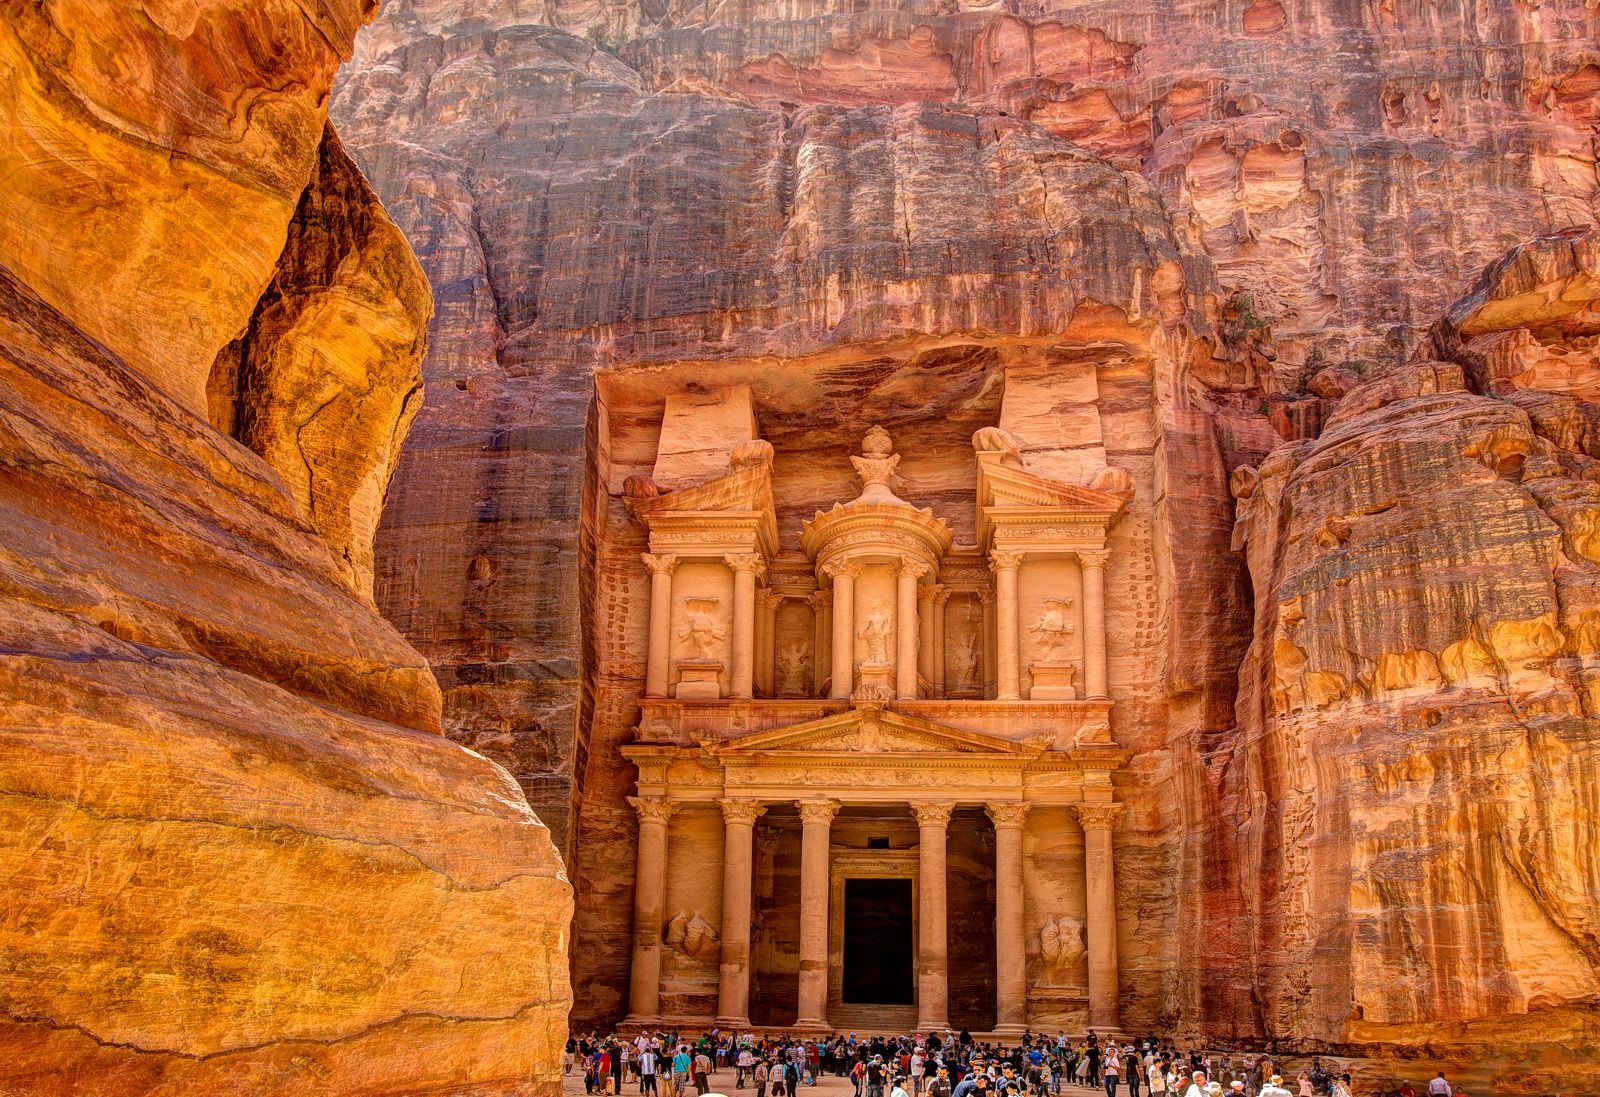 Petra and Wadi Rum 3 Day Tour from Tel Aviv $320